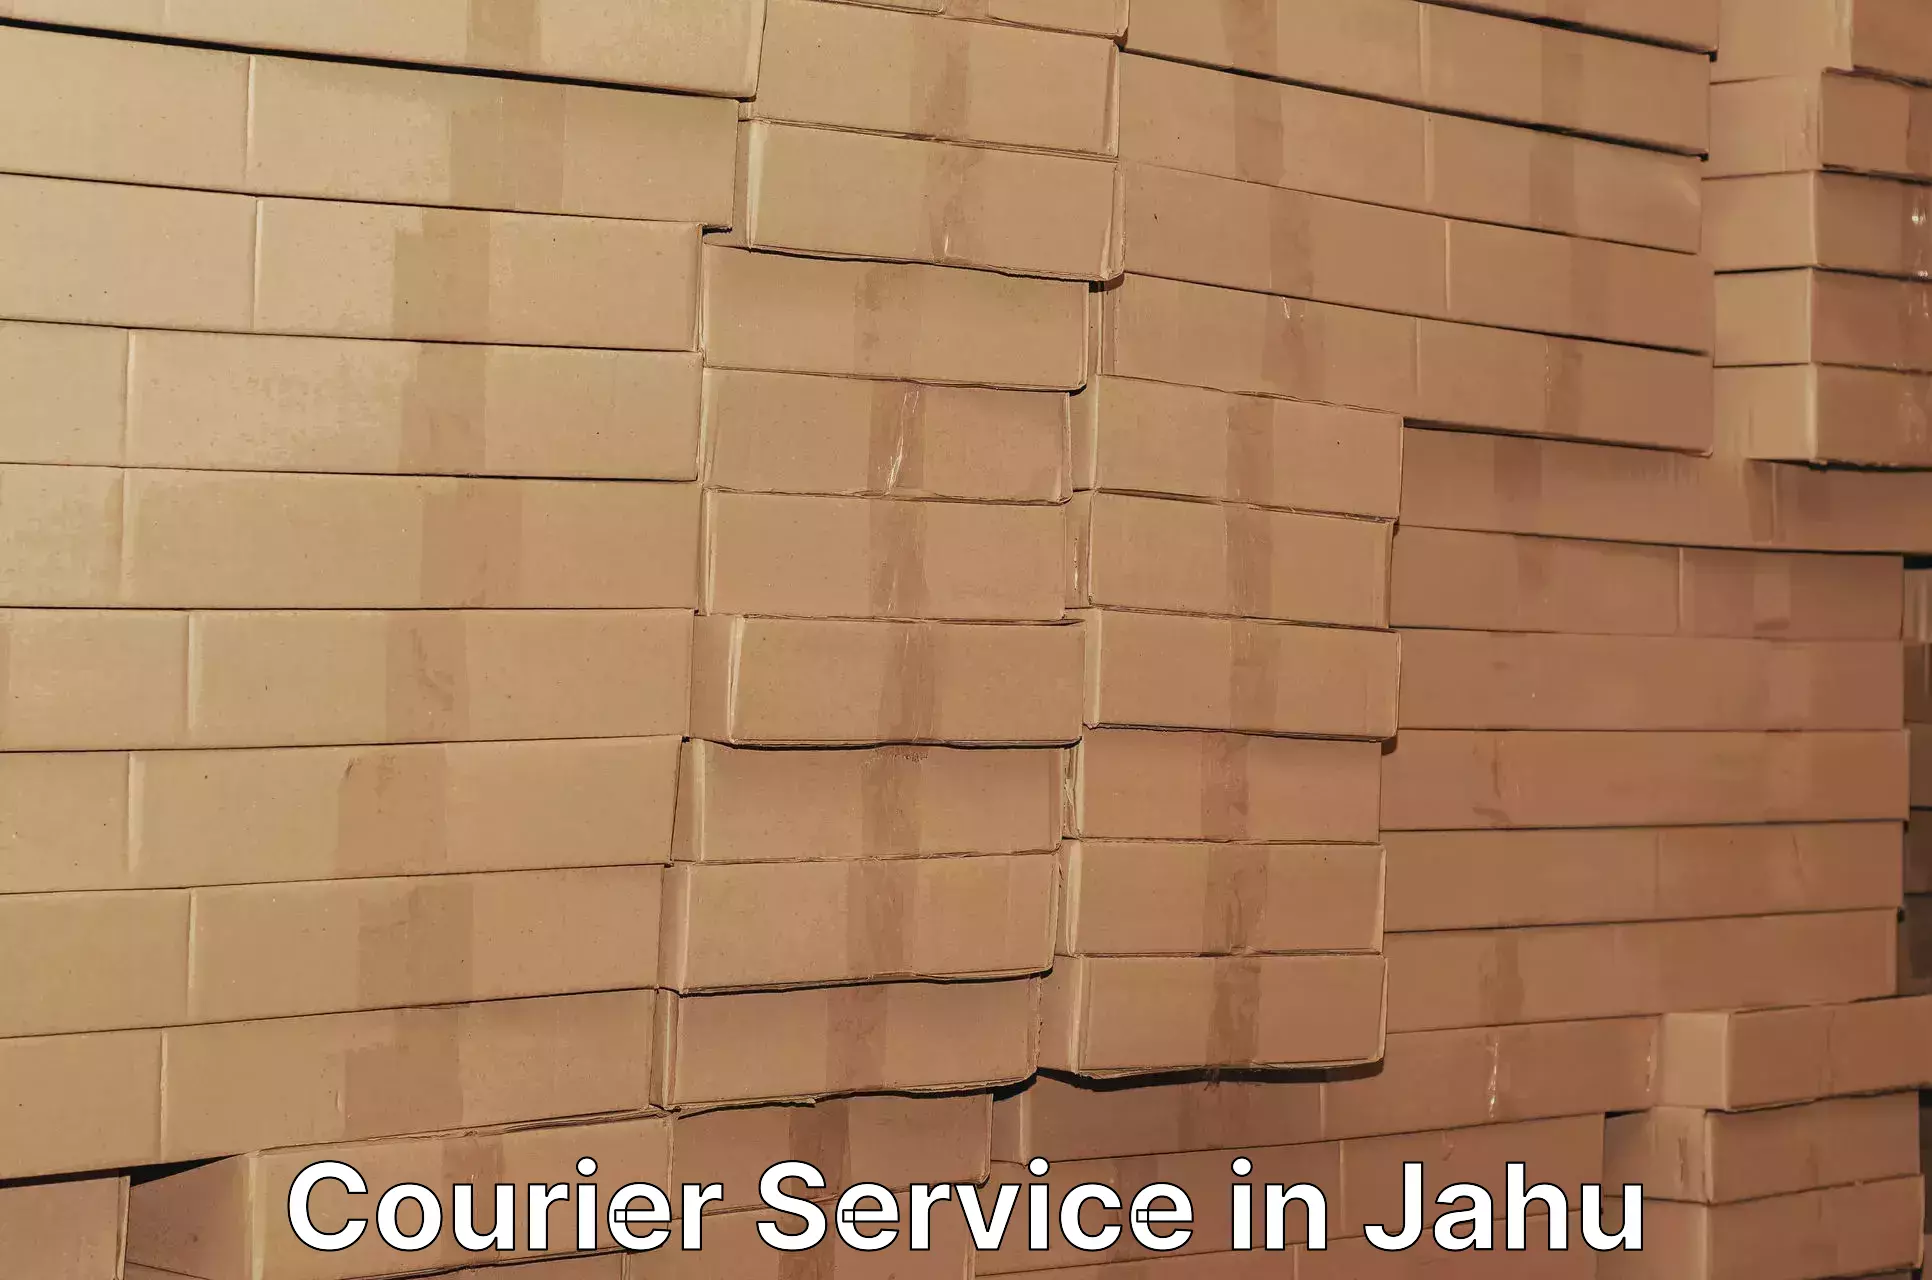 Flexible delivery schedules in Jahu